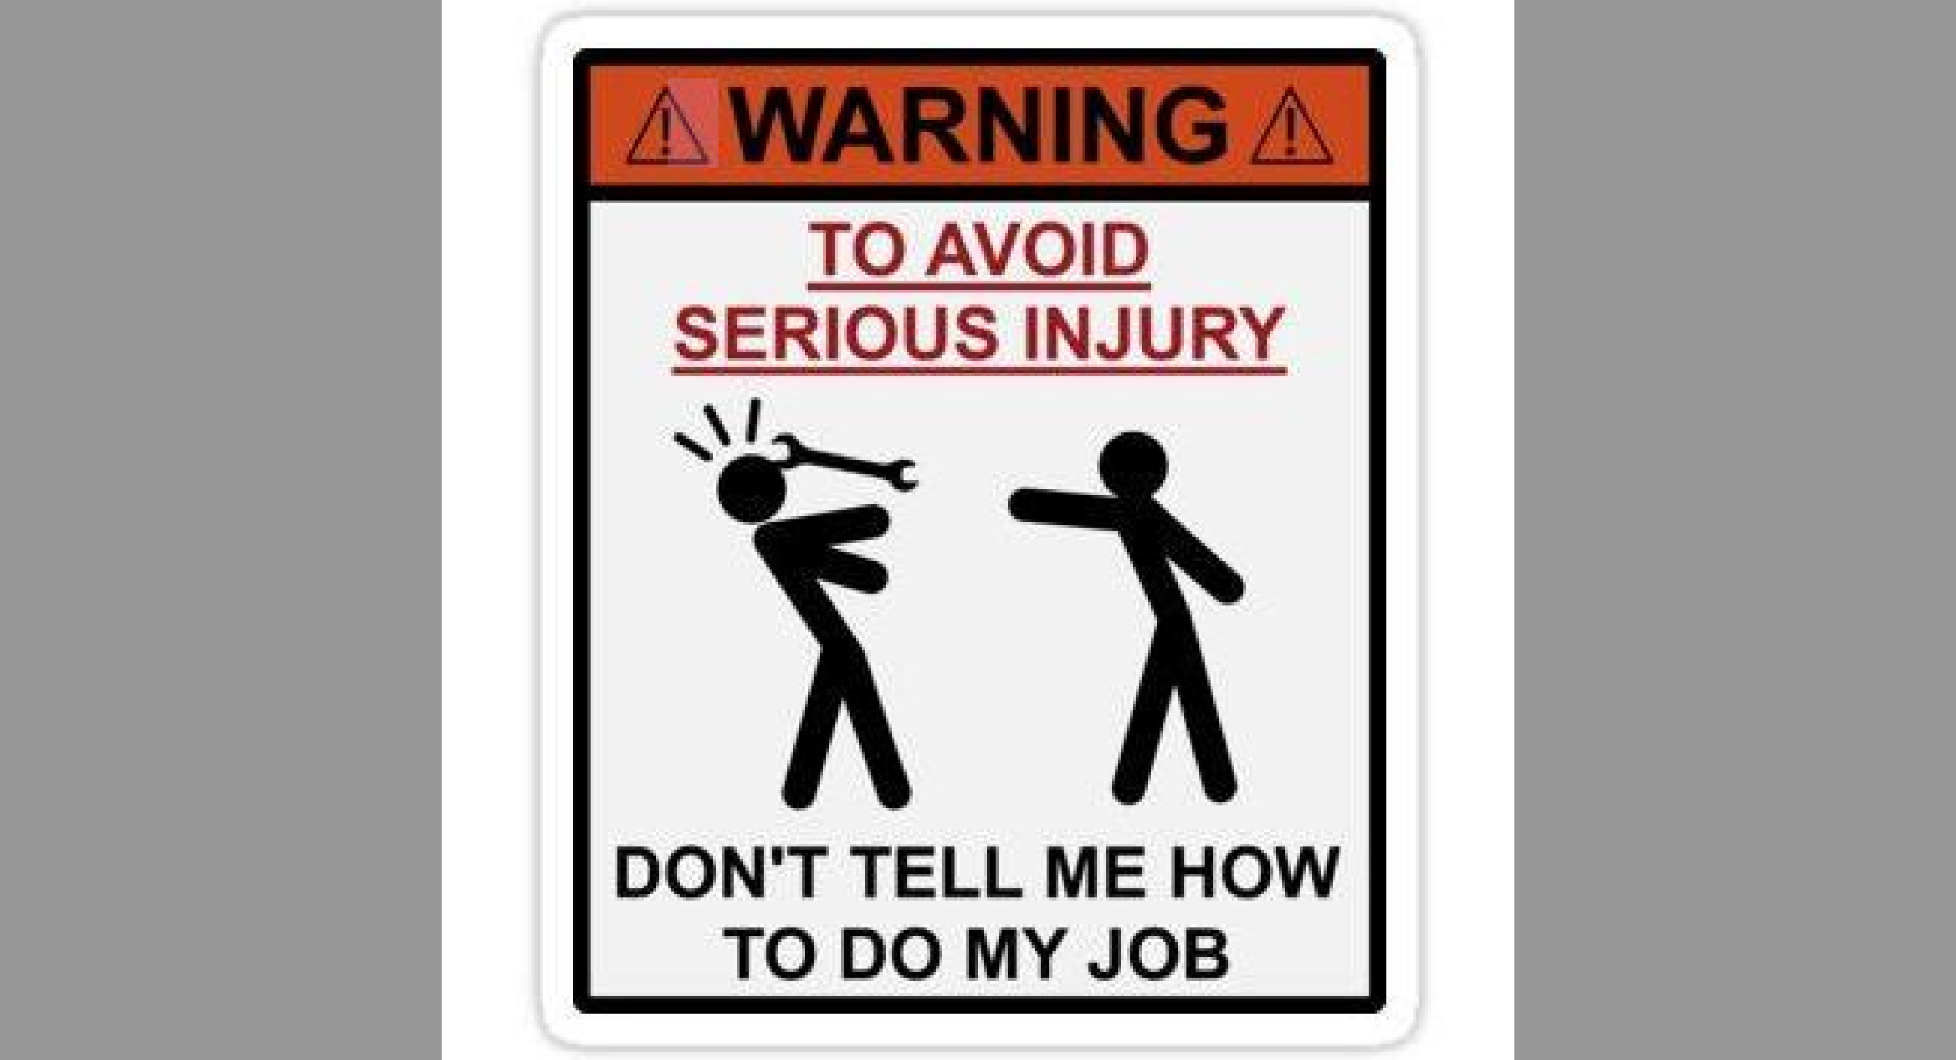 Don't tell me how to do my job. Warning don't tell me how to do my job. Don't tell me how to do my job poster. To avoid injury don't tell me how to do my job перевод. Don t get around